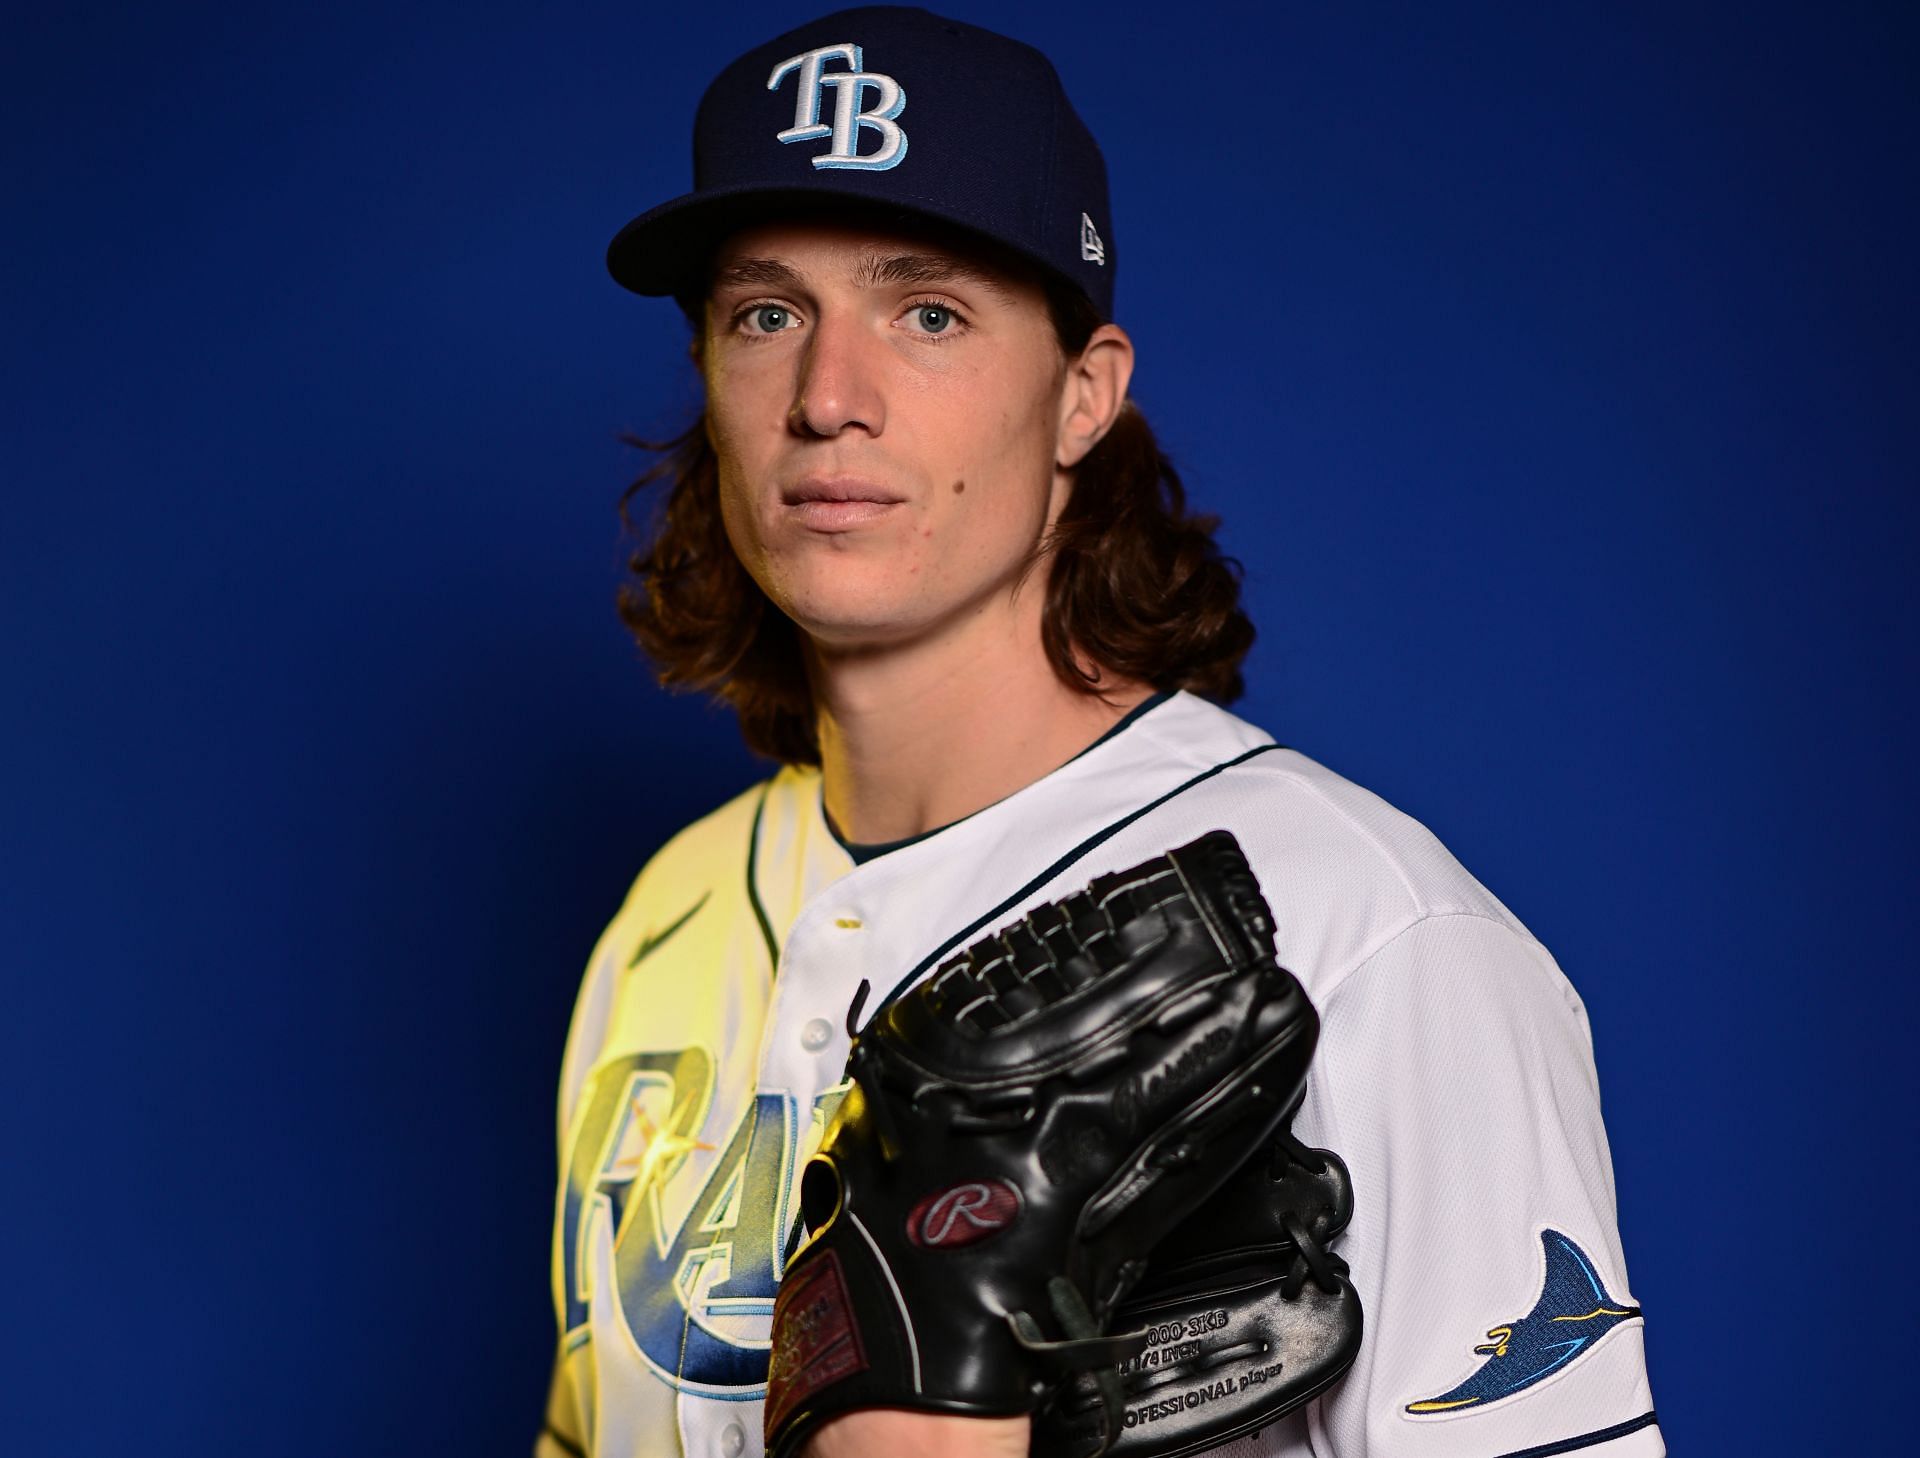 With Tyler Glasnow shut down again, Rays move forward unsure of